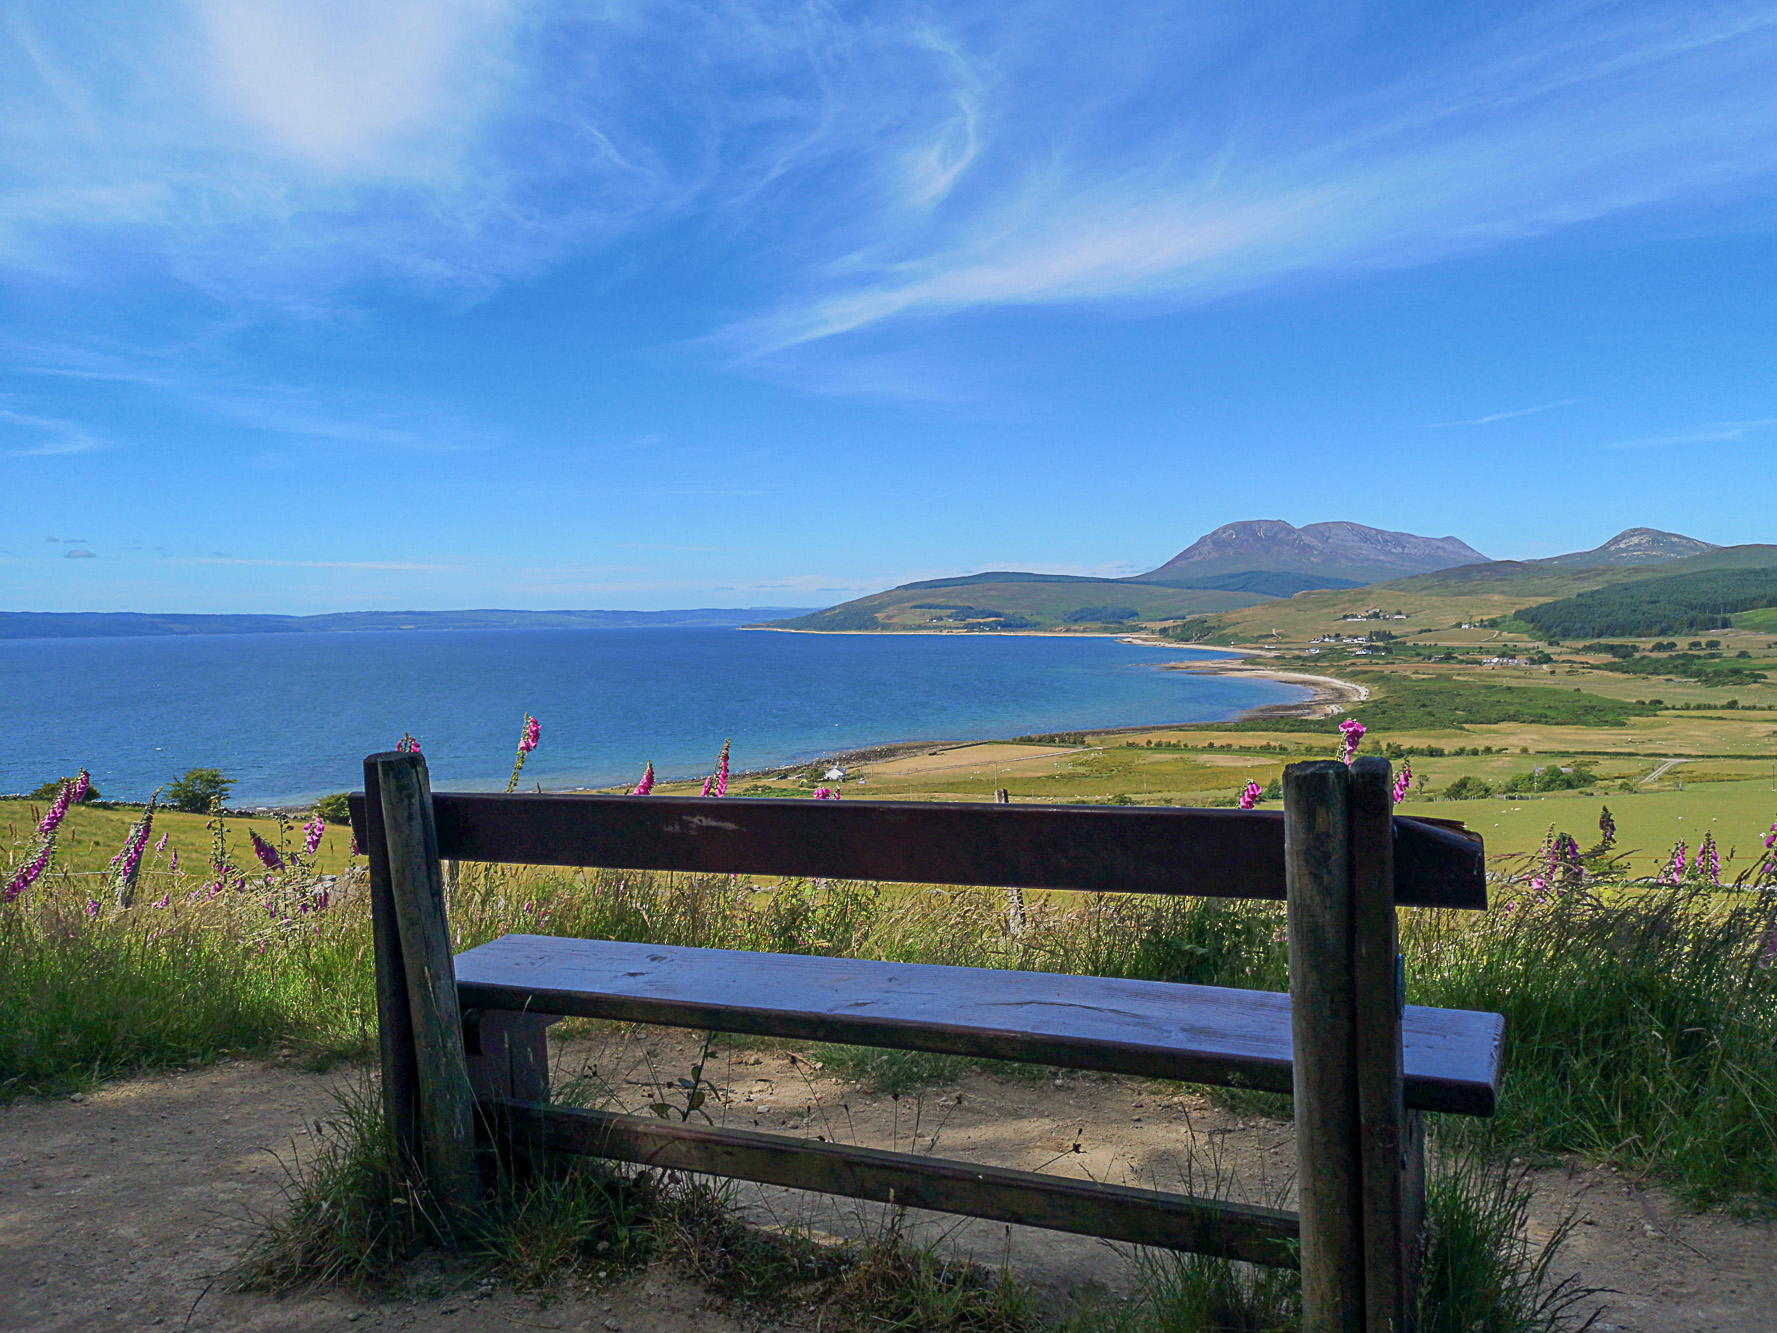 Bench with a view across the lush green landscape, blue ocean and hills in the distance